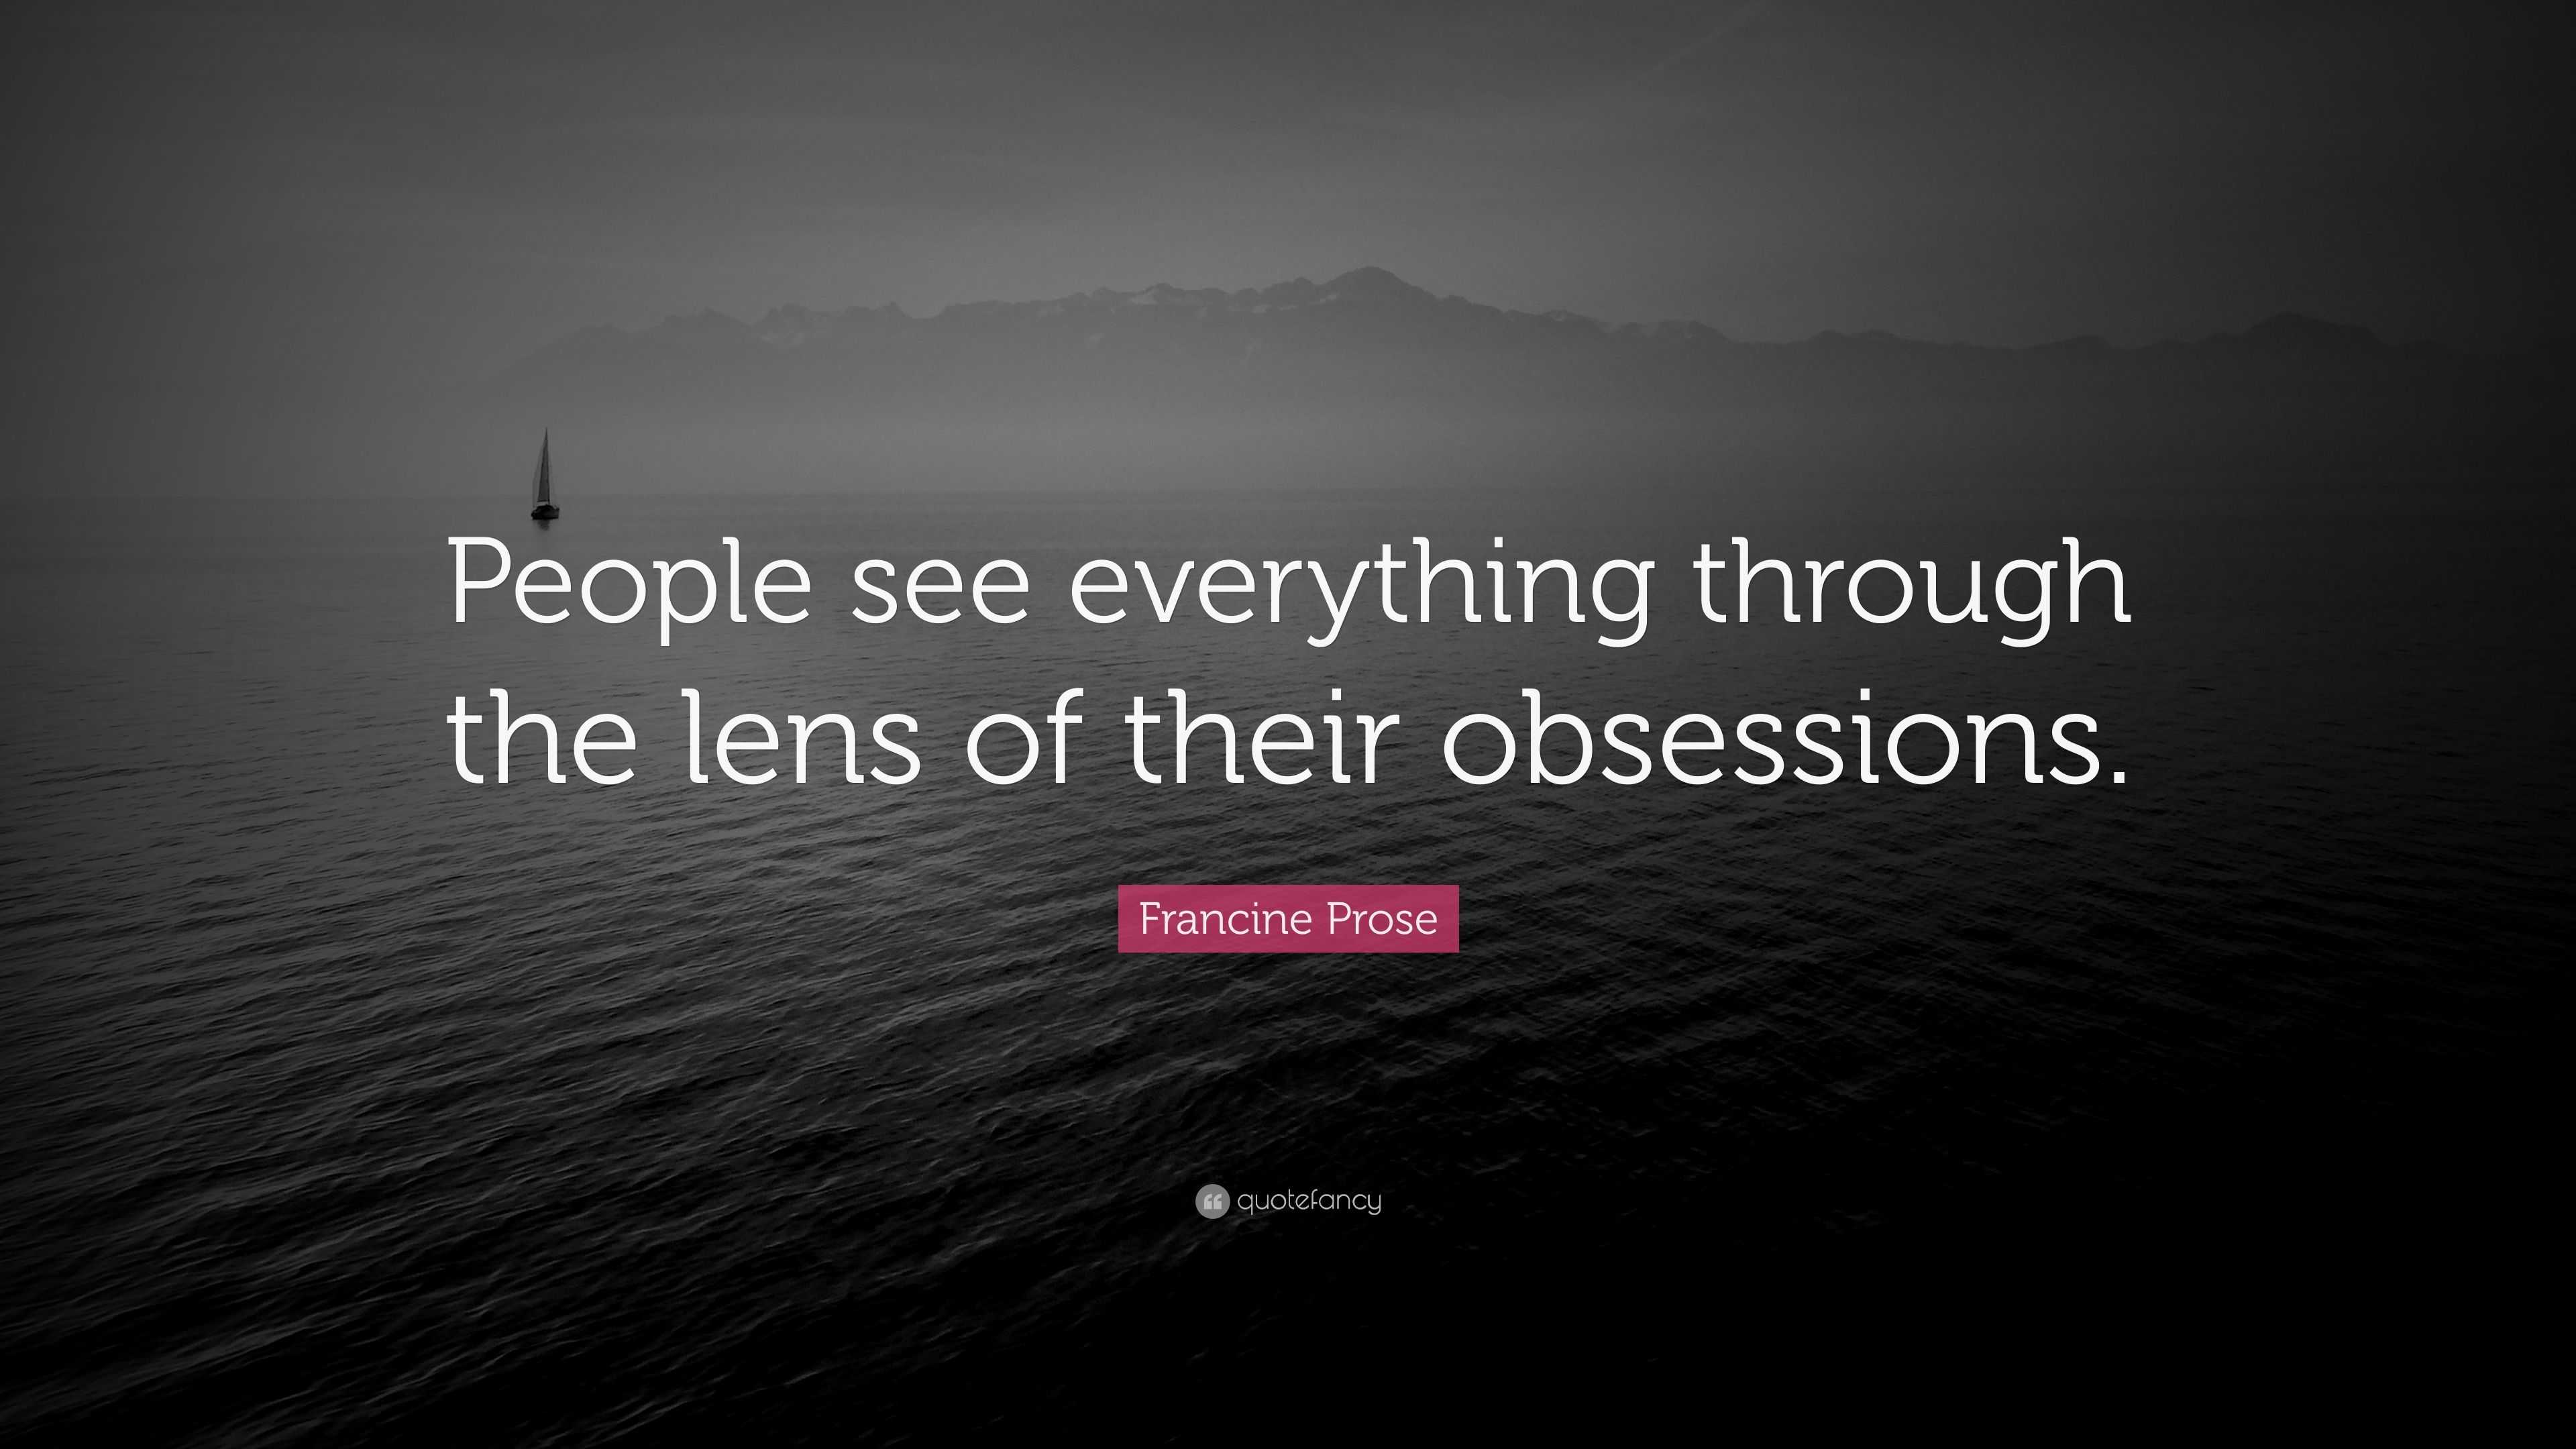 Francine Prose Quote: “People see everything through the lens of their ...